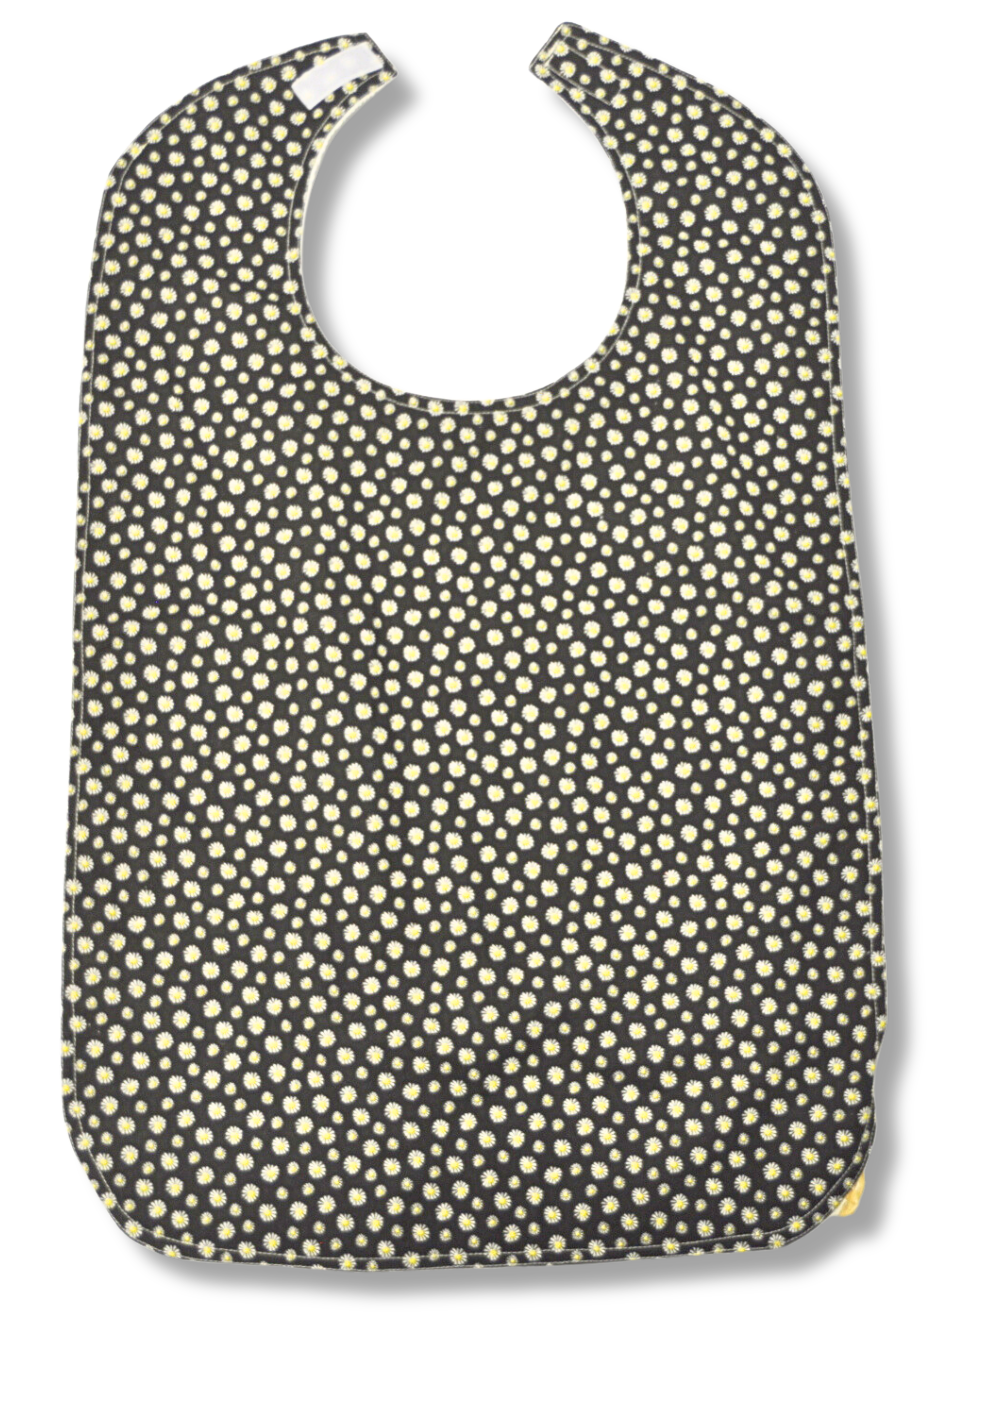 Bibs for Men & Women, Highly Absorbent Breathable Washable and Reusable- Black & Yellow Sunflowers